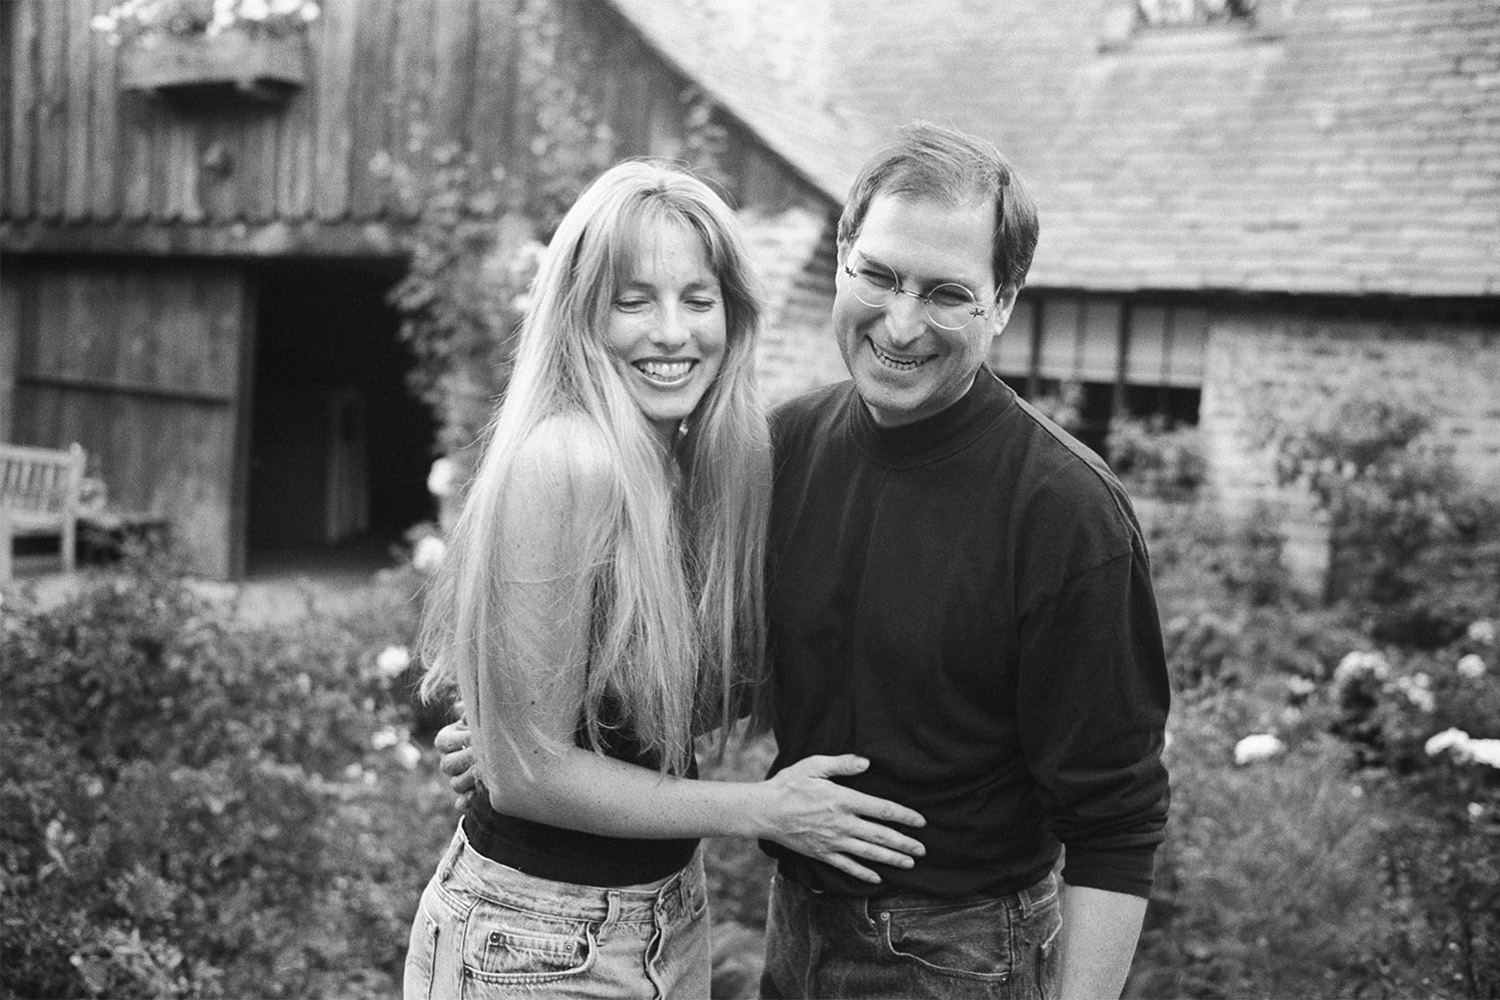 Jobs told photographer Walker that this 1997 image with his wife Laurene at their Palo Alto, Calif., home was one of his favorites.